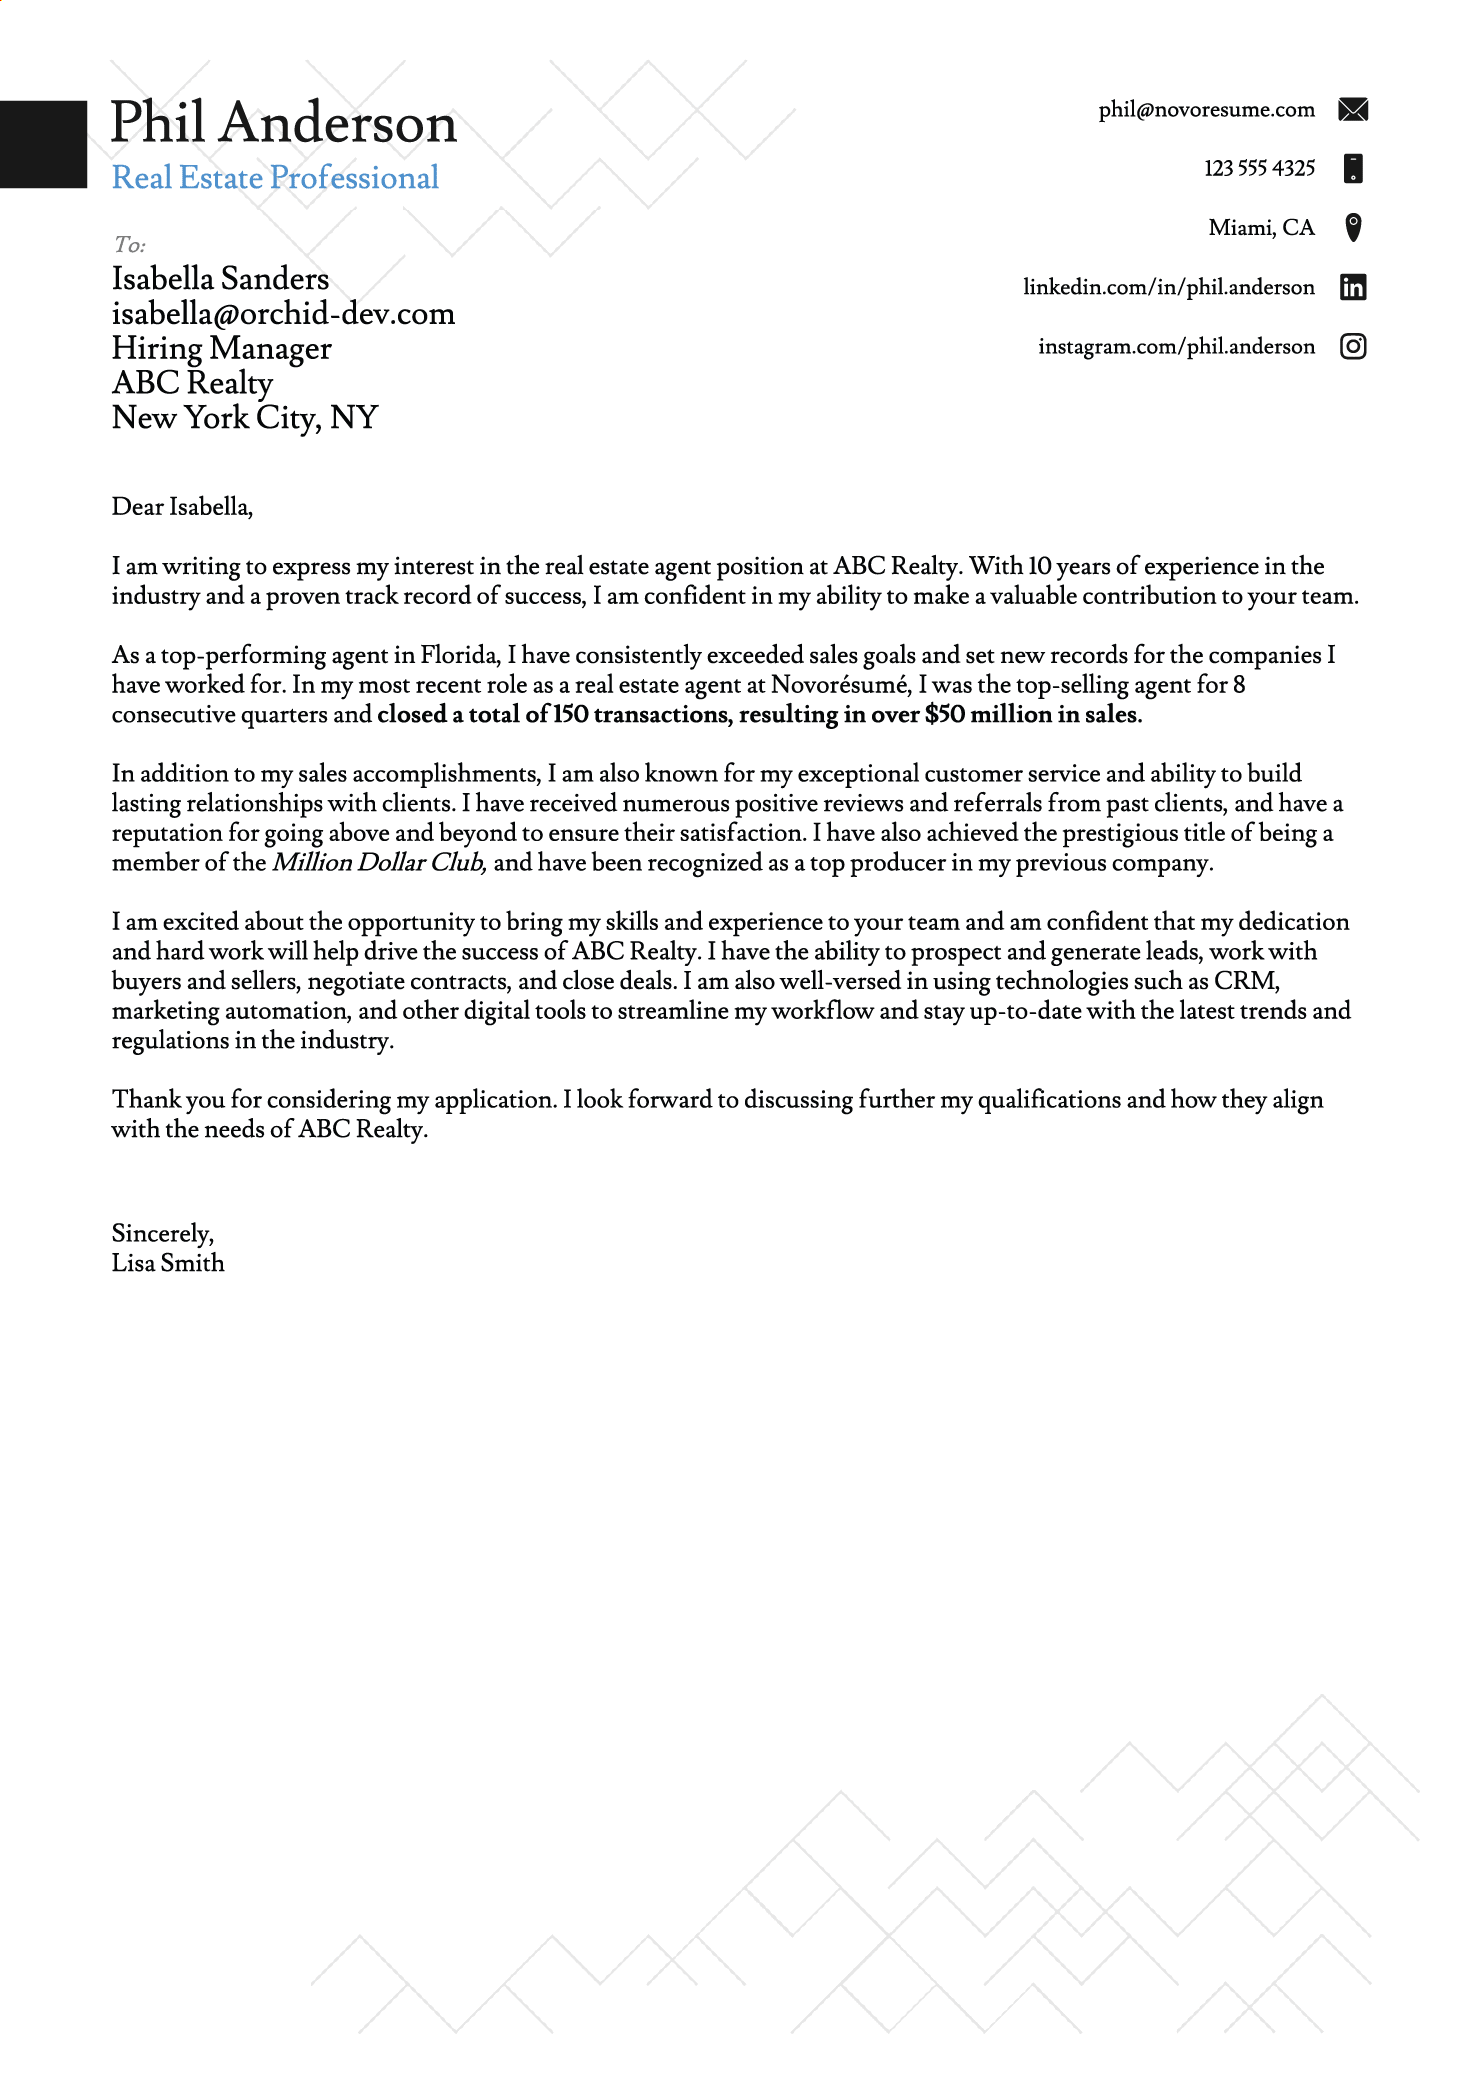 cover letter template for job